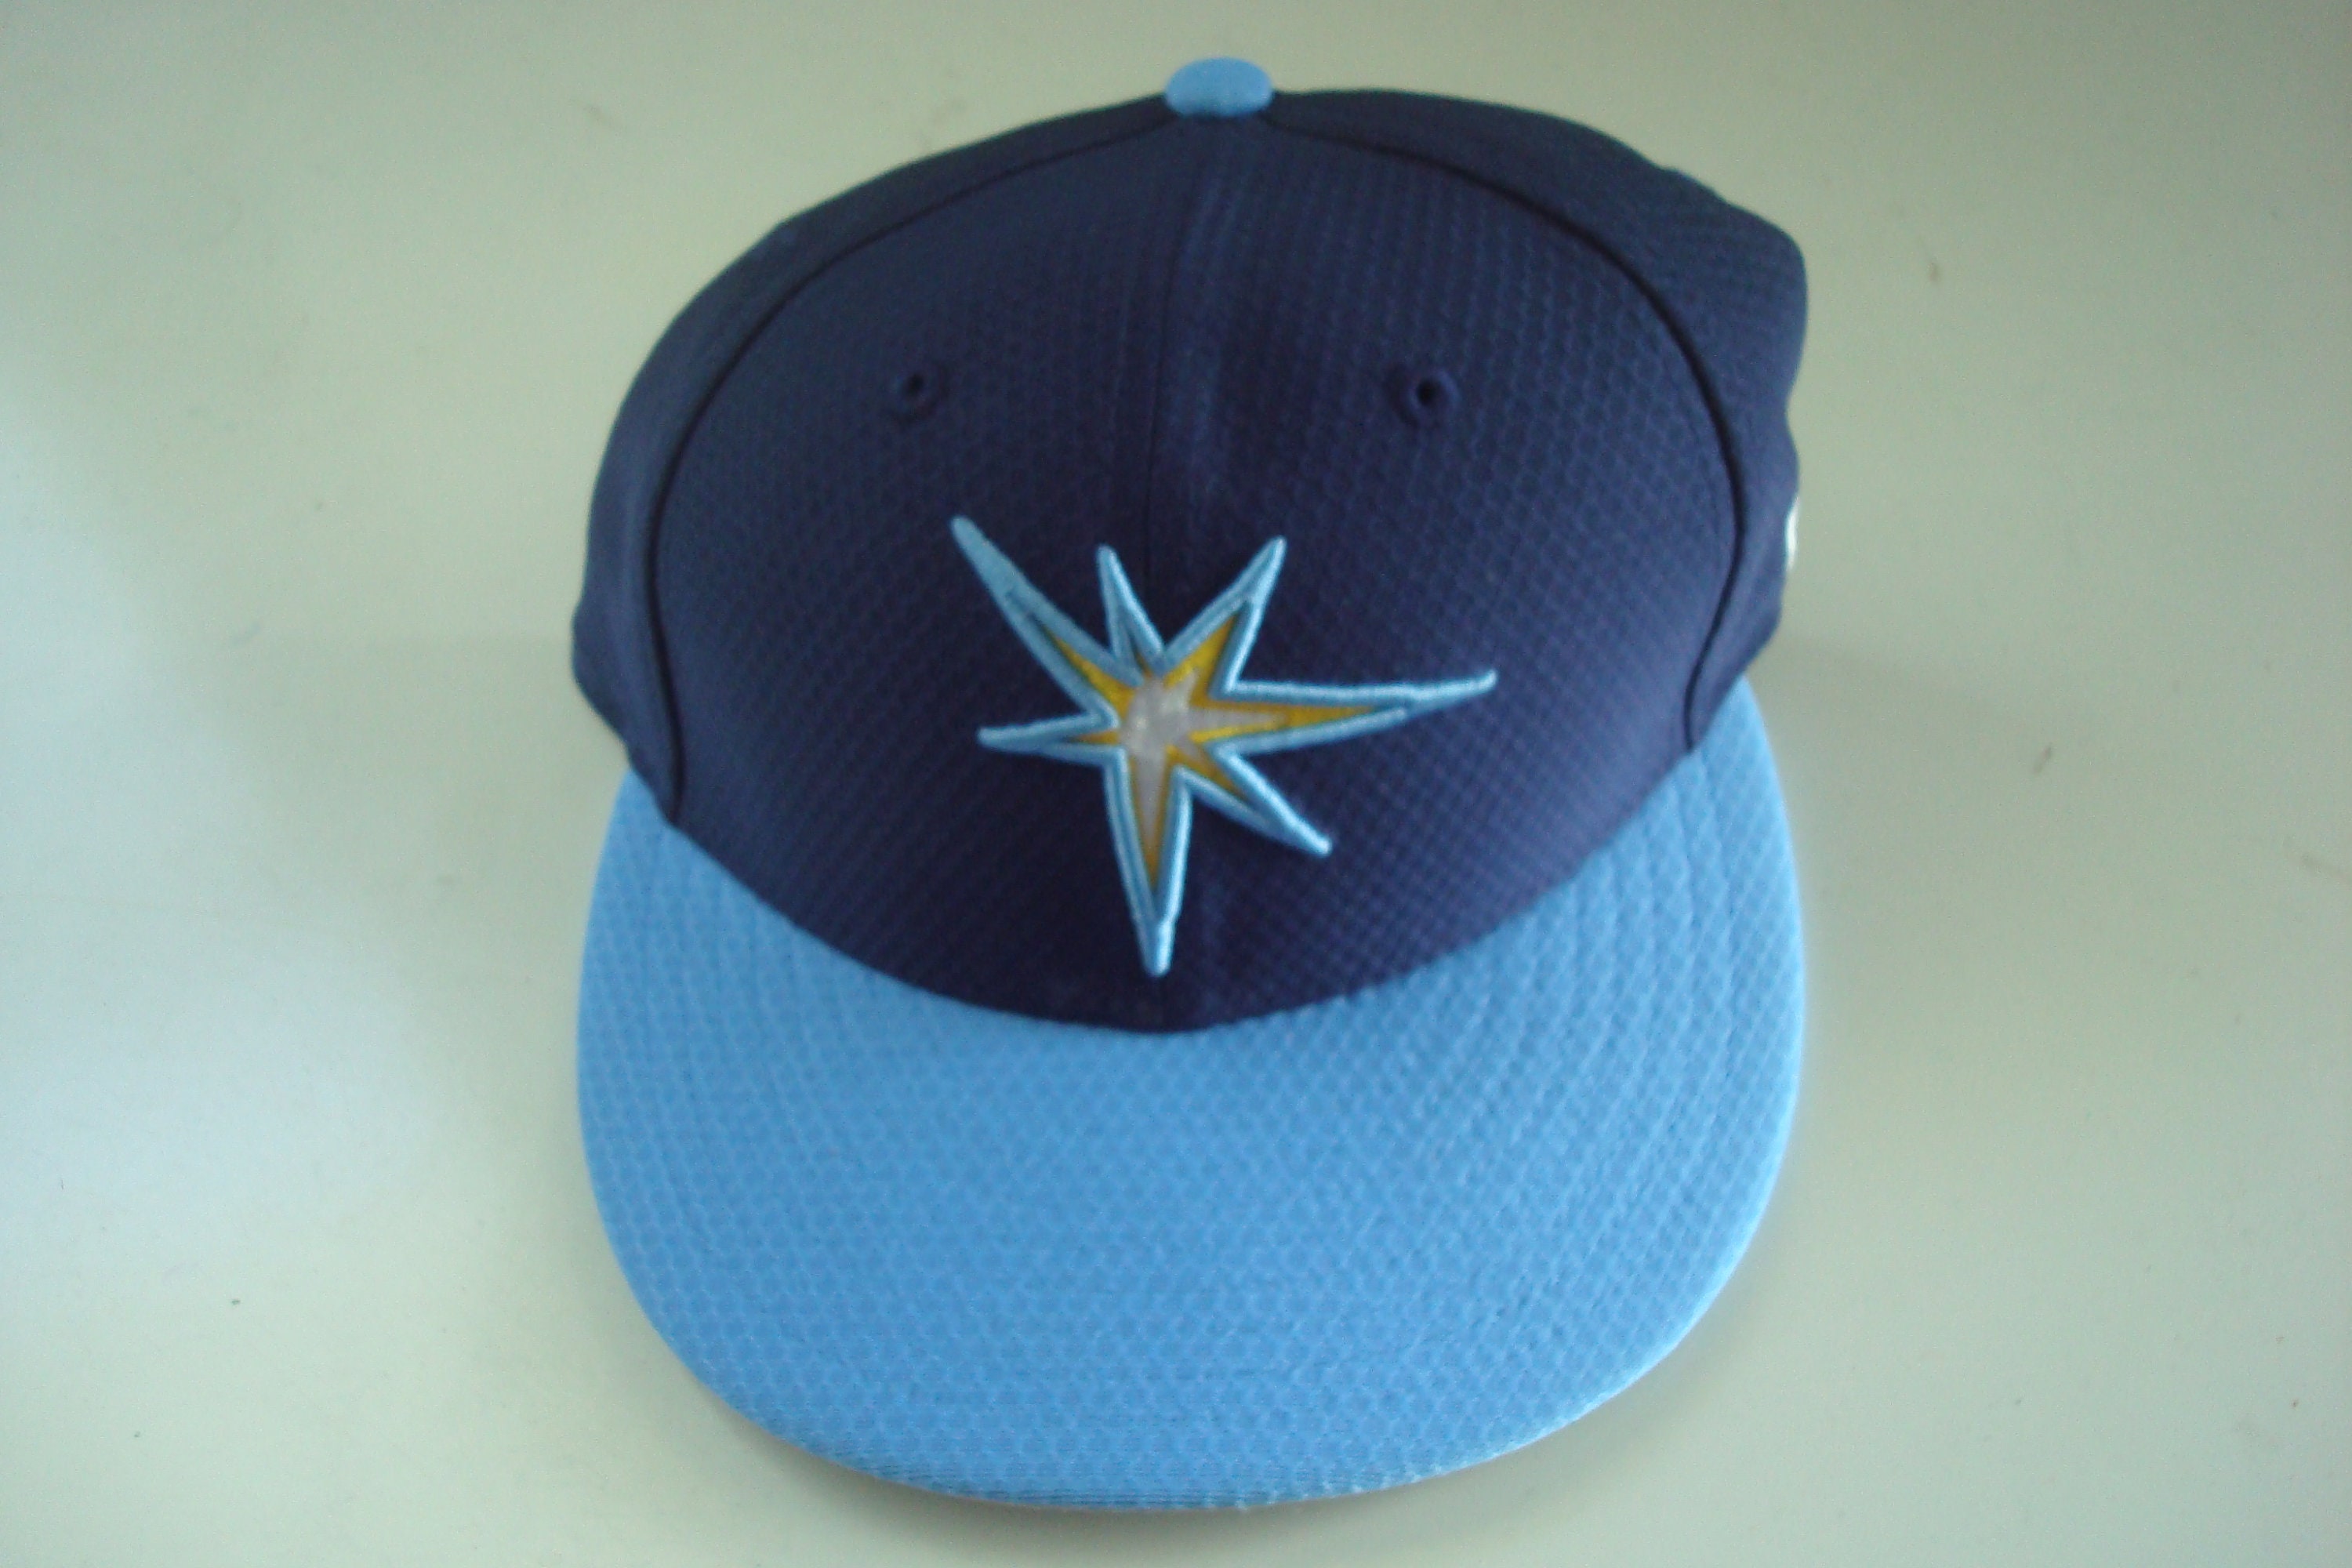 Tampa Bay Rays New Era Fitted Sz 6 3/4 Script Vintage Hat Cap Vintage